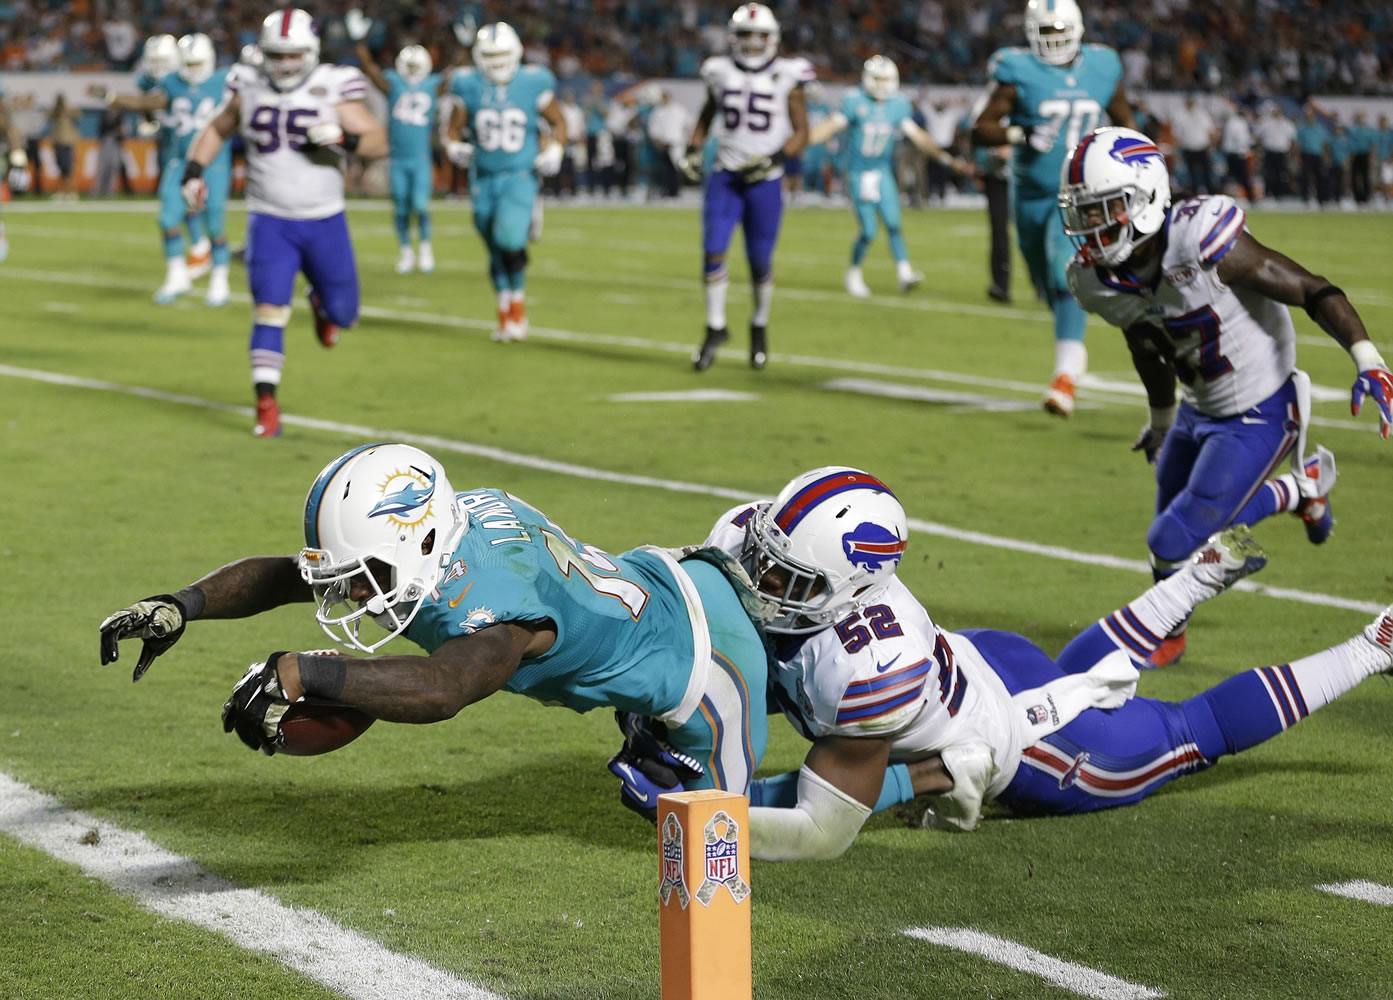 Ryan Tannehill throws for two scores as Dolphins earn 22-9 victory